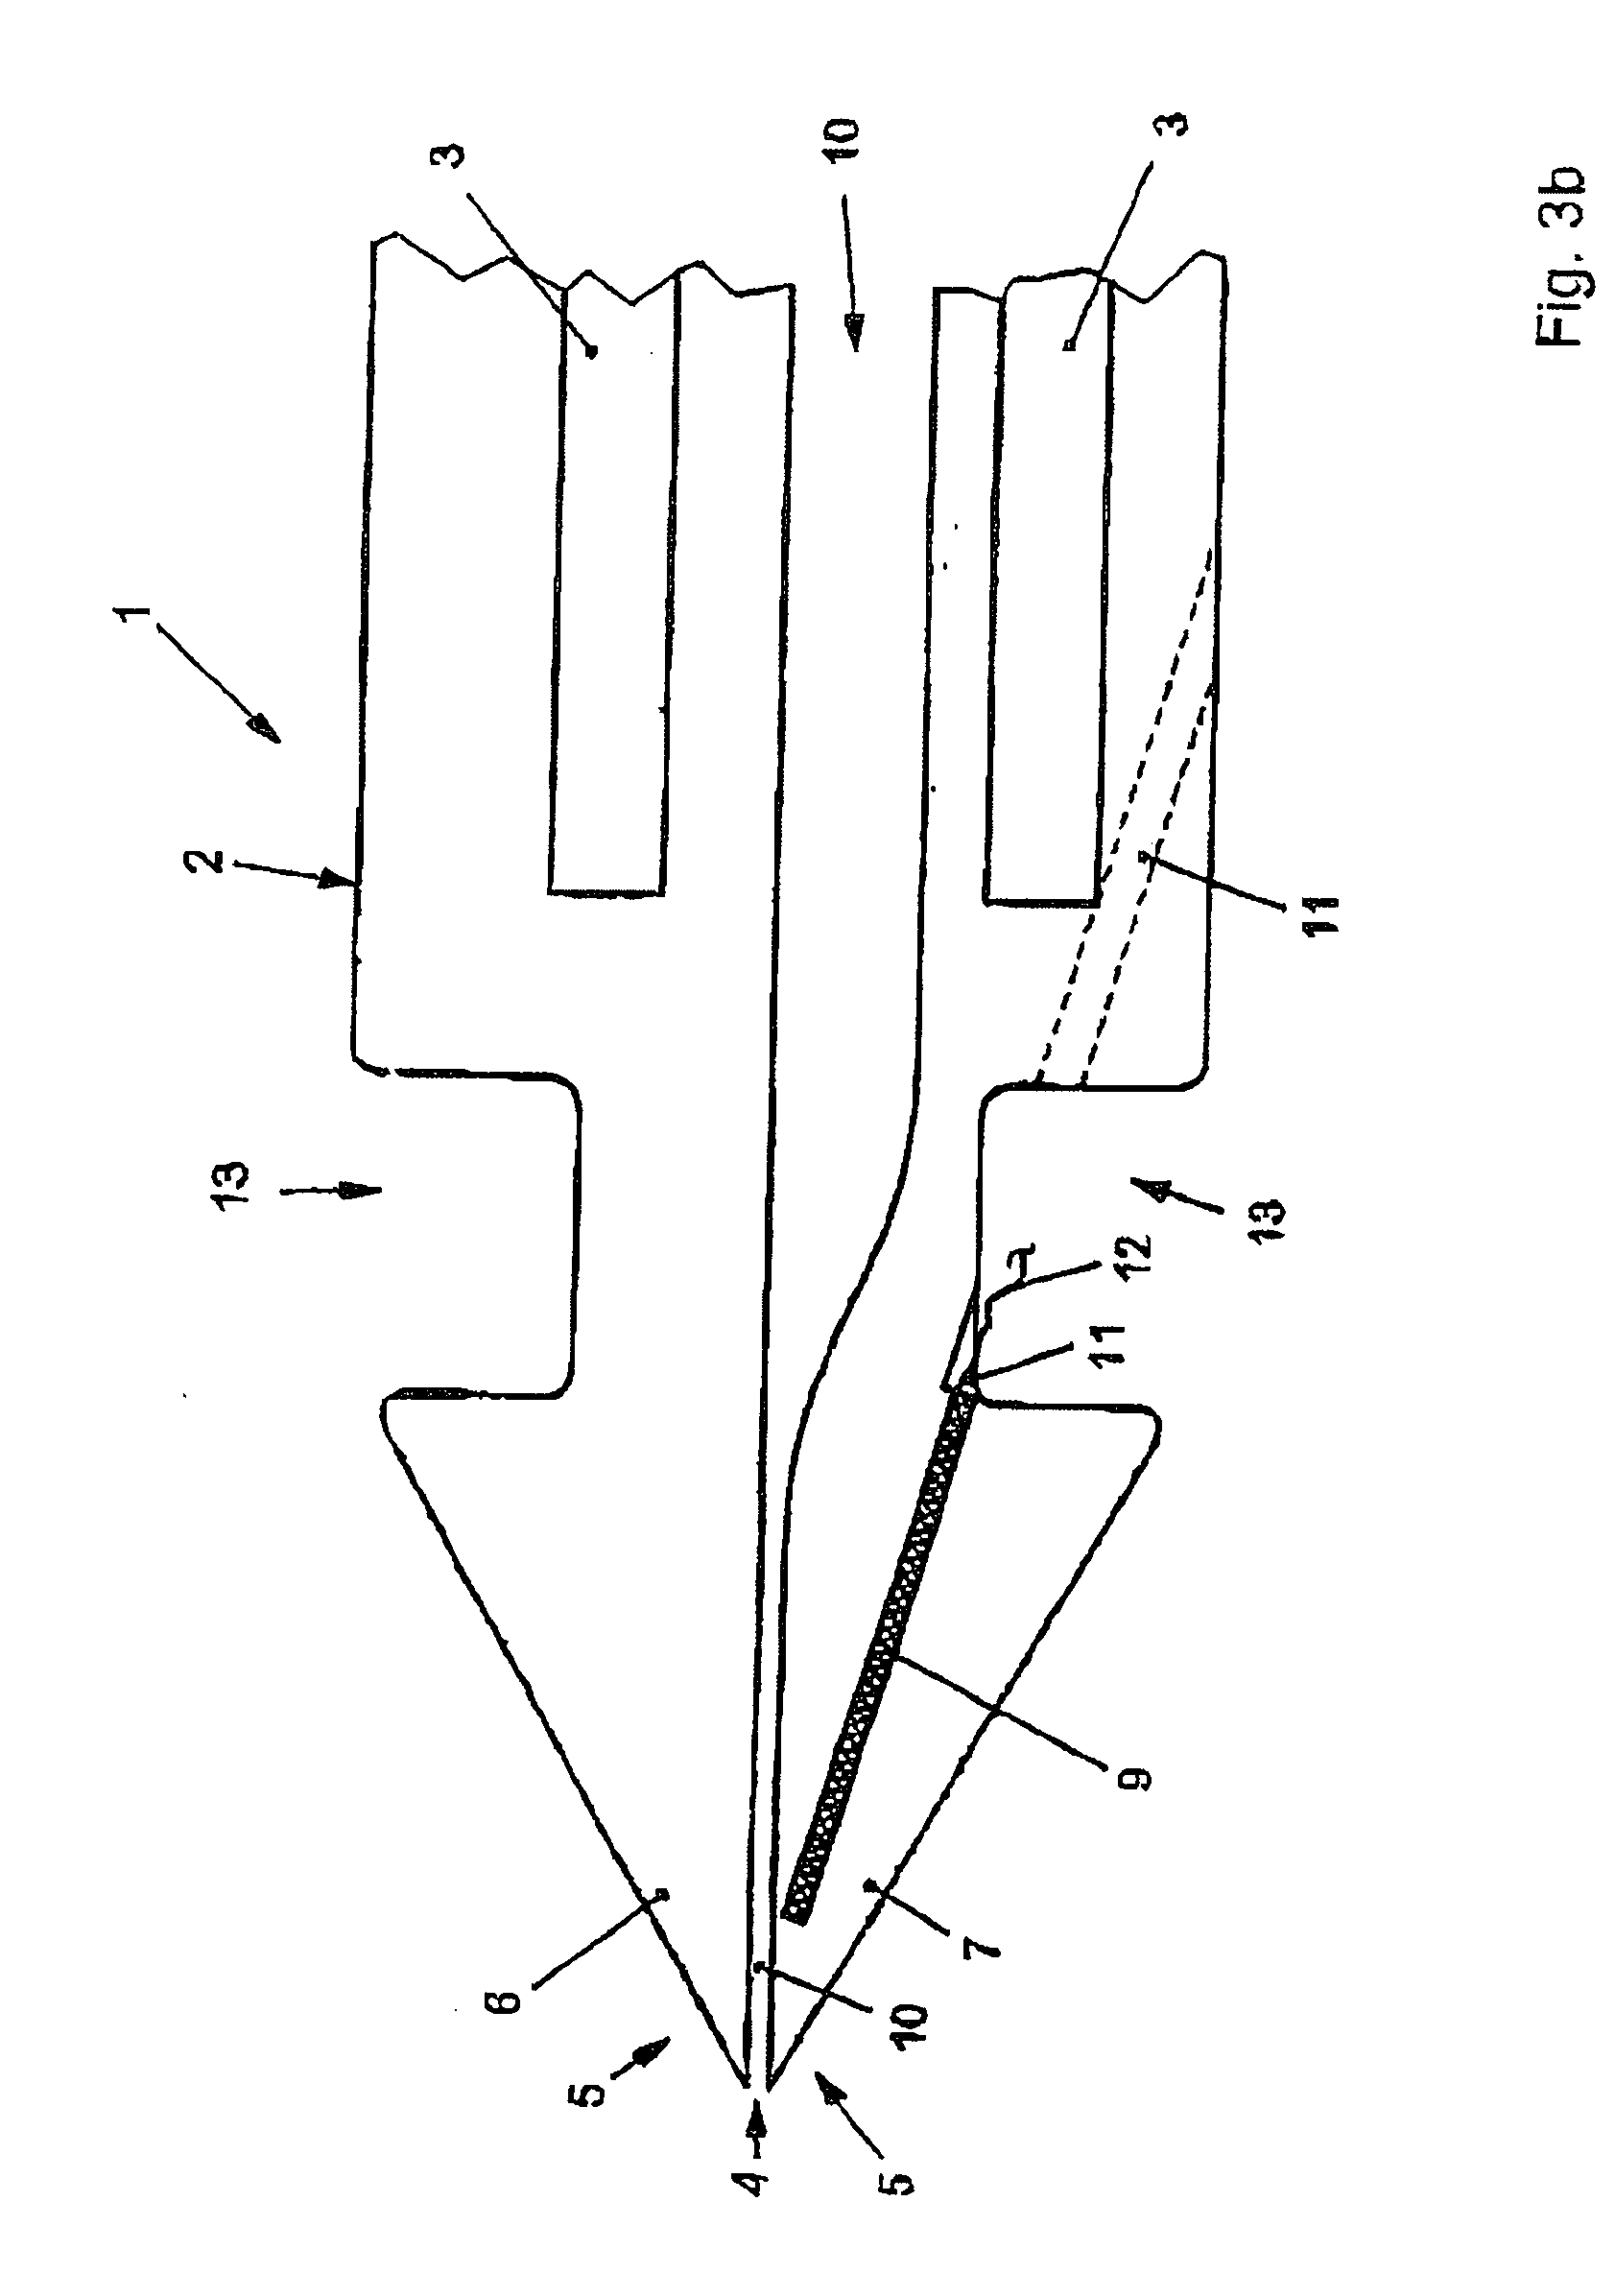 Method of operating extrusion installations for extruding thermoplastics